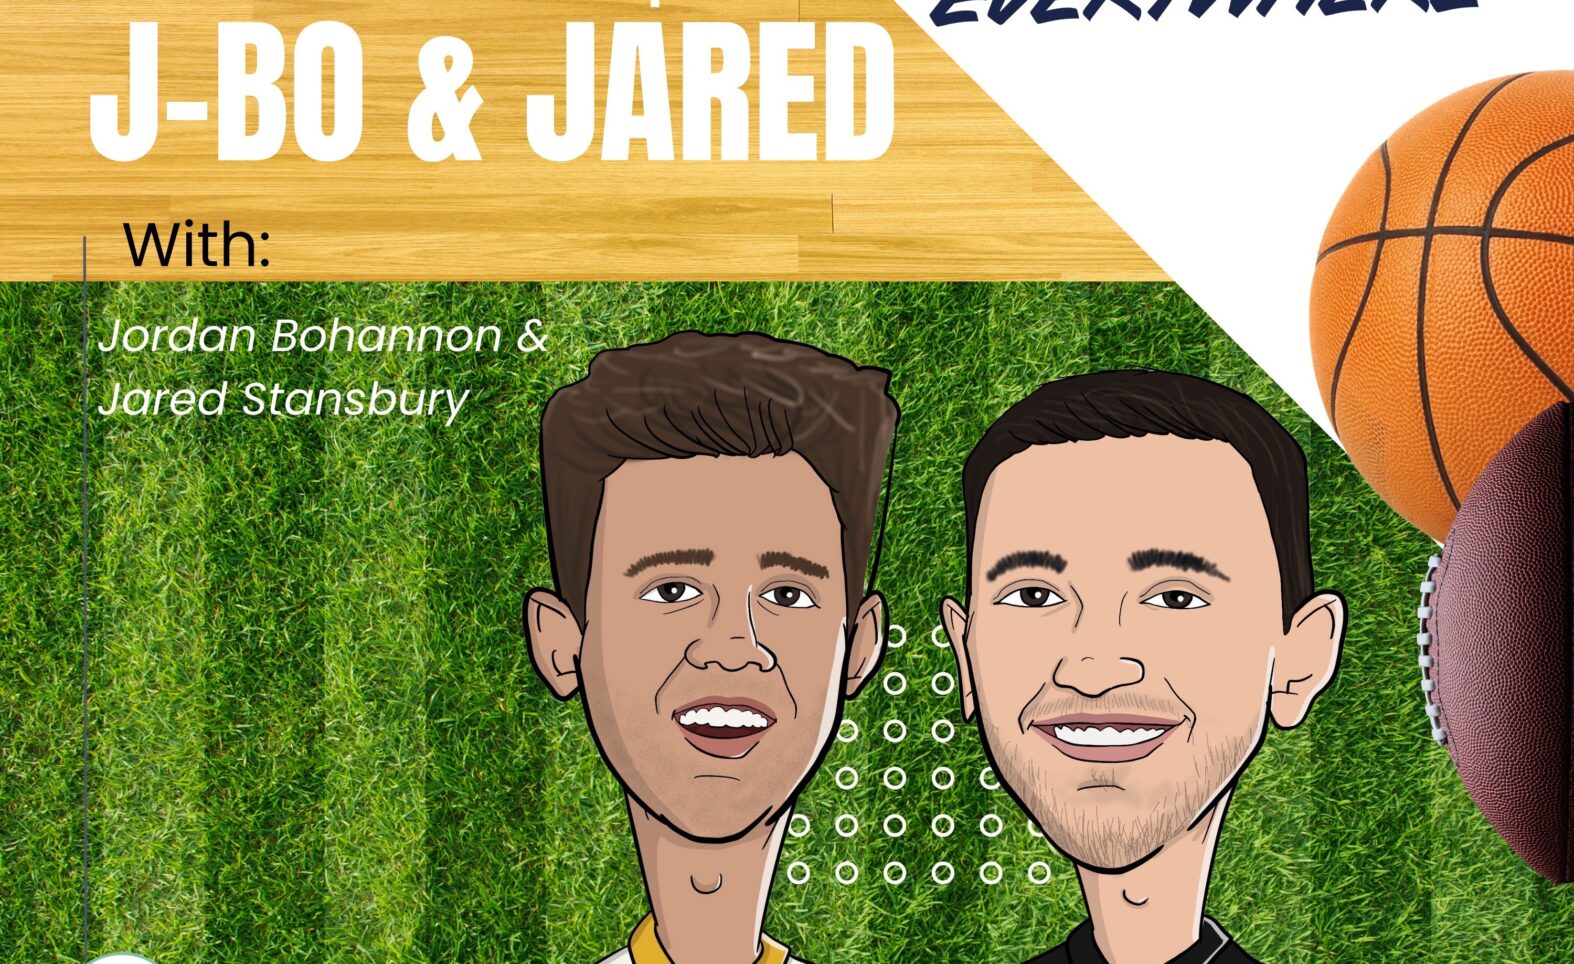 J-Bo & Jared: WBB national title game, way-too-early top-25 and more